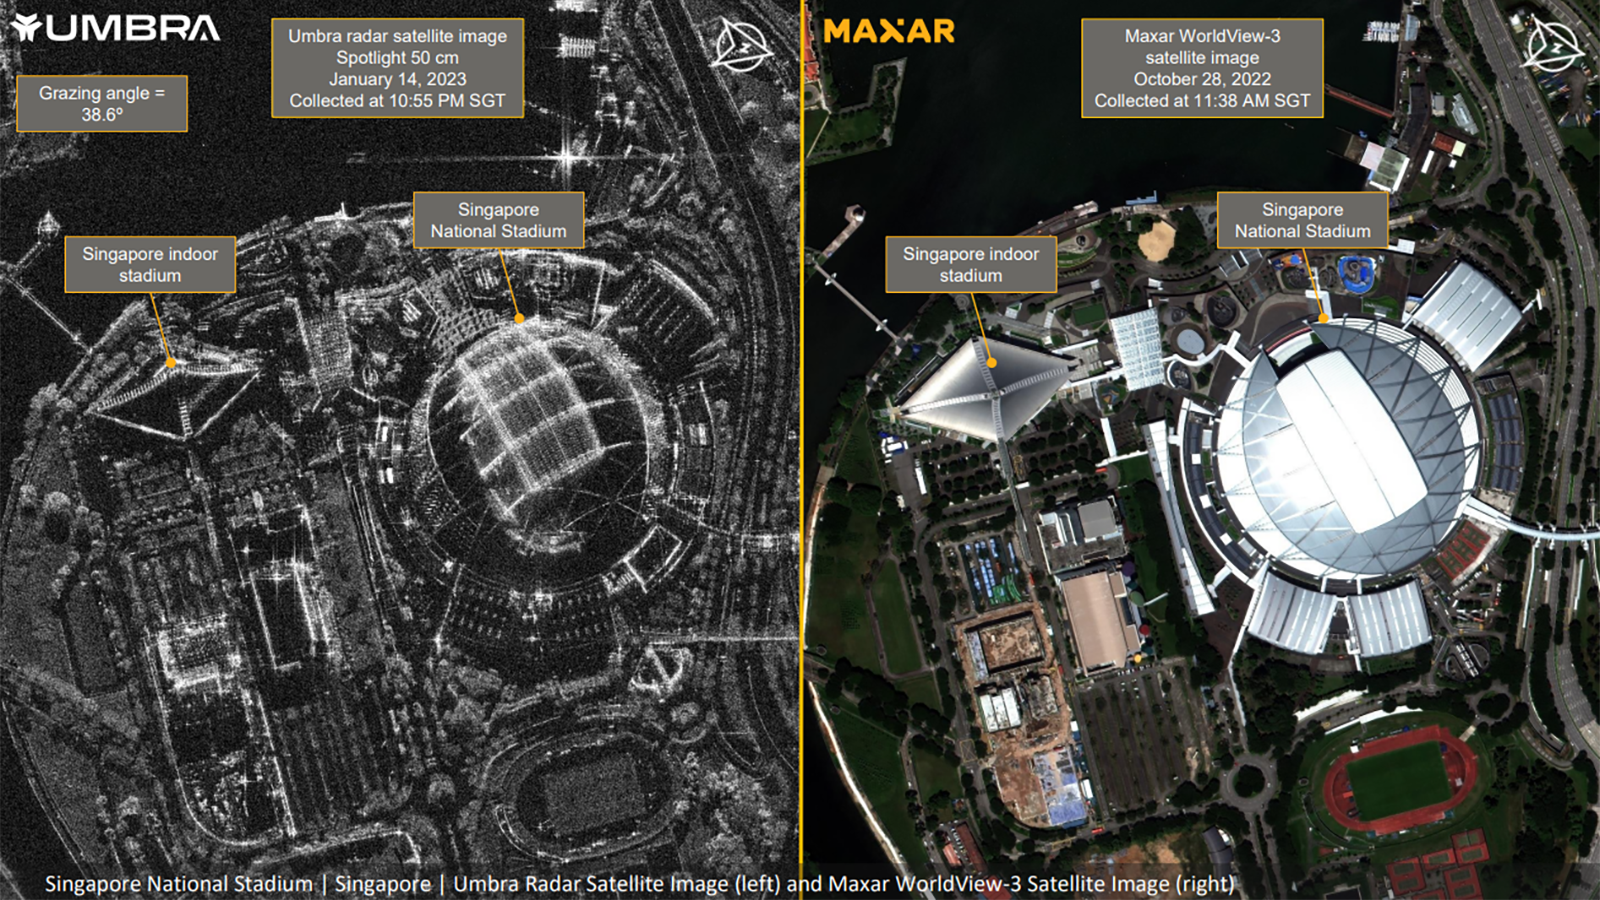 Maxar contracts startup Umbra to supply SAR satellite data